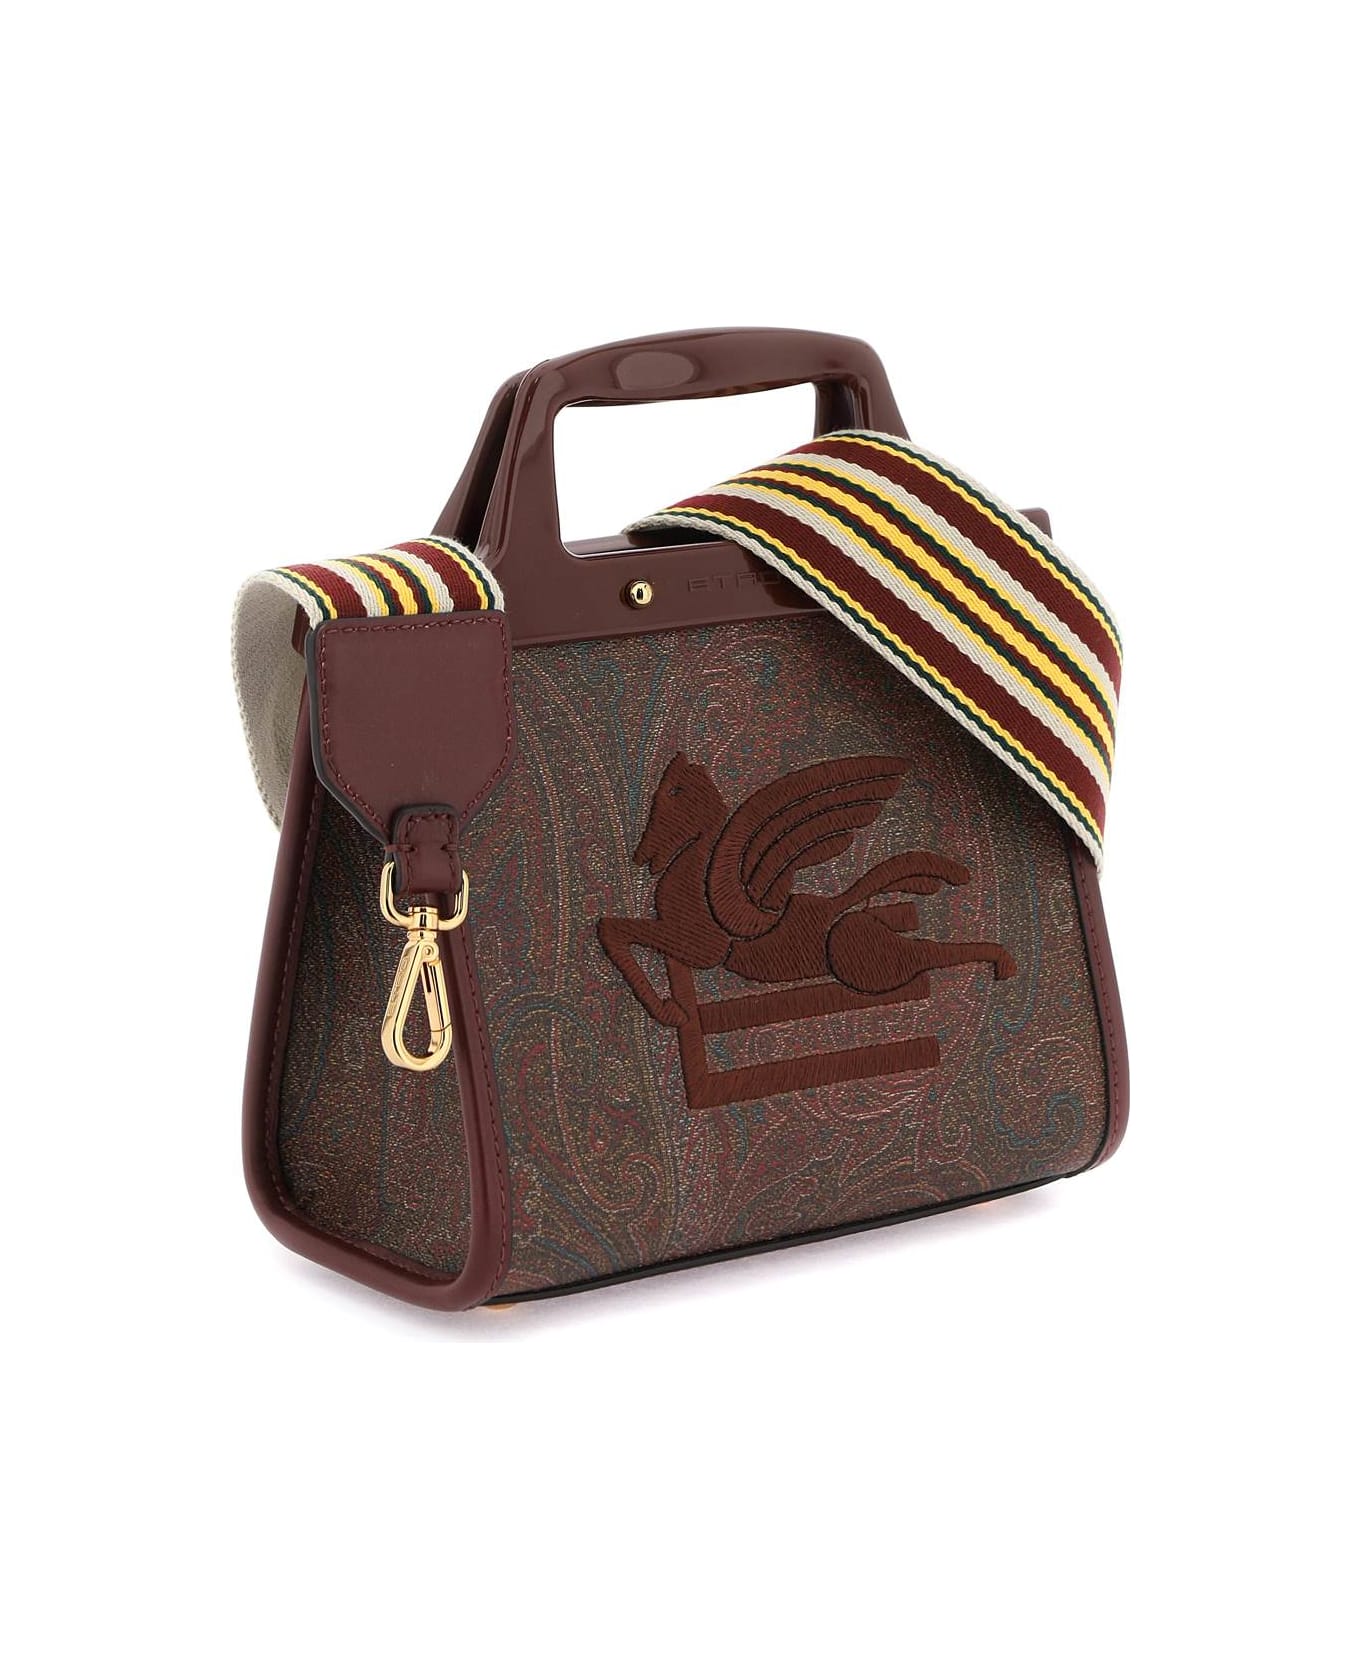 Etro 'love Trotter' Tote Bag - Brown